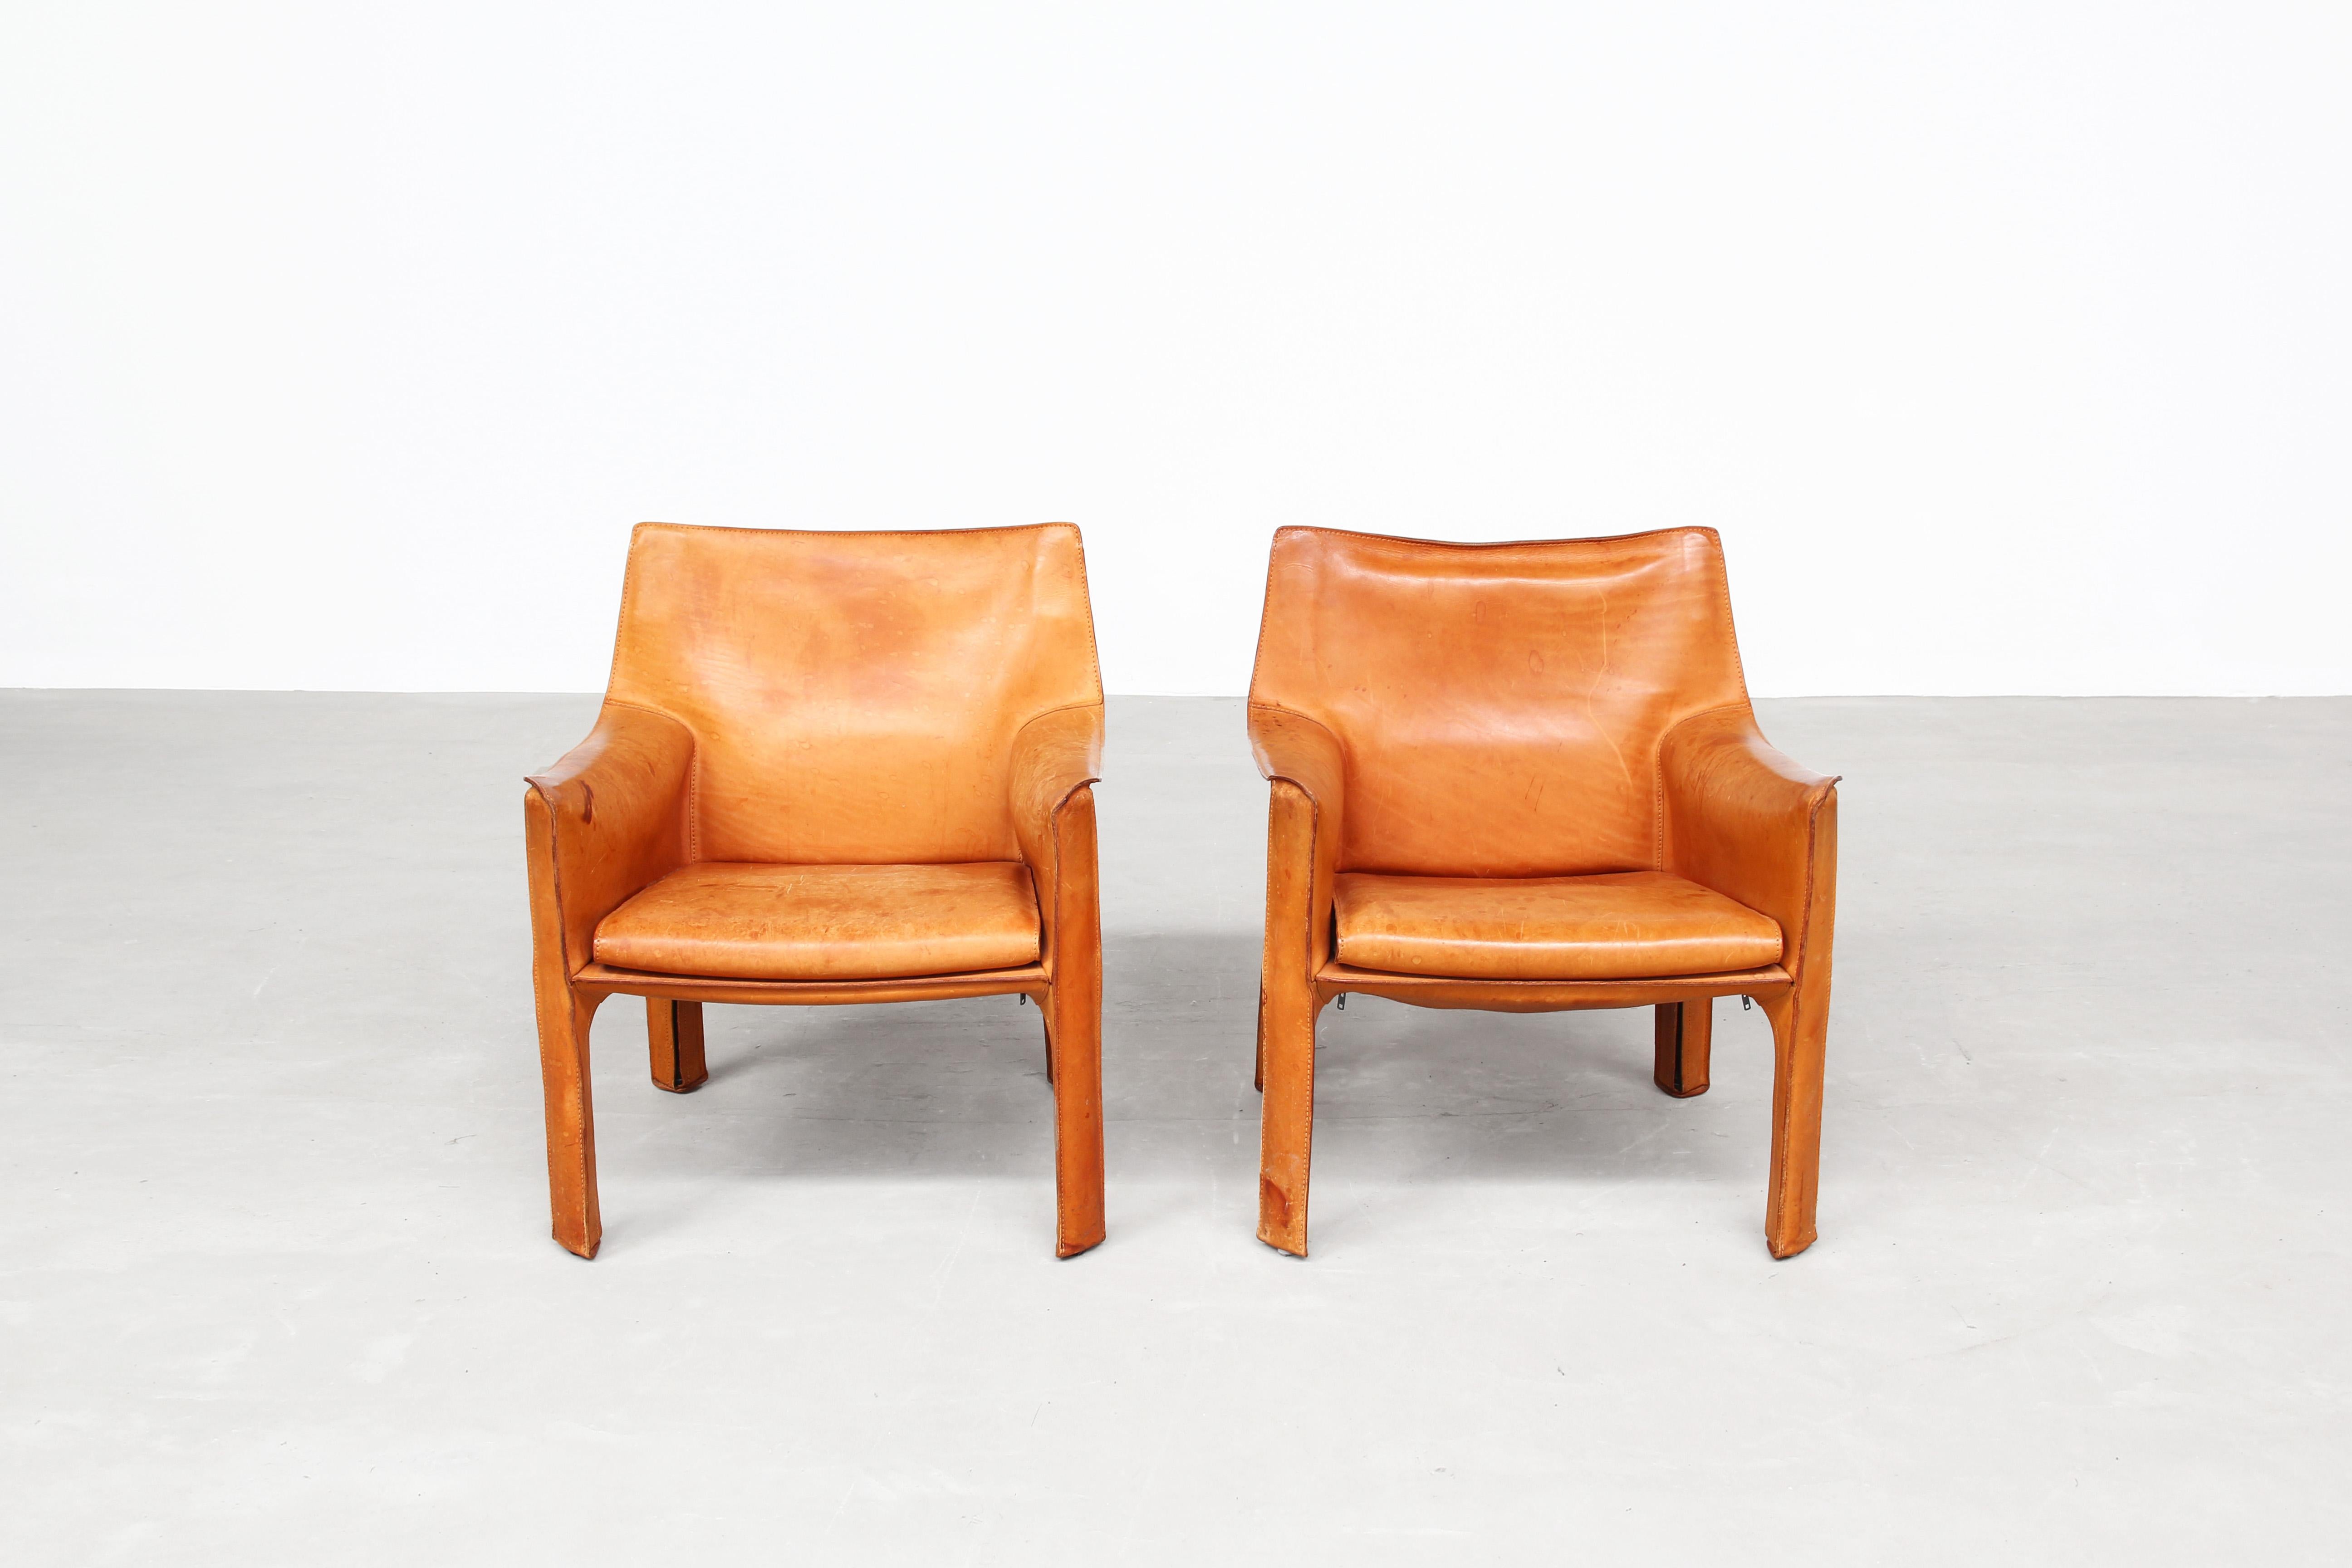 Late 17th Century Pair of Lounge Chairs by Mario Bellini for Cassina Italy 1980s Leather